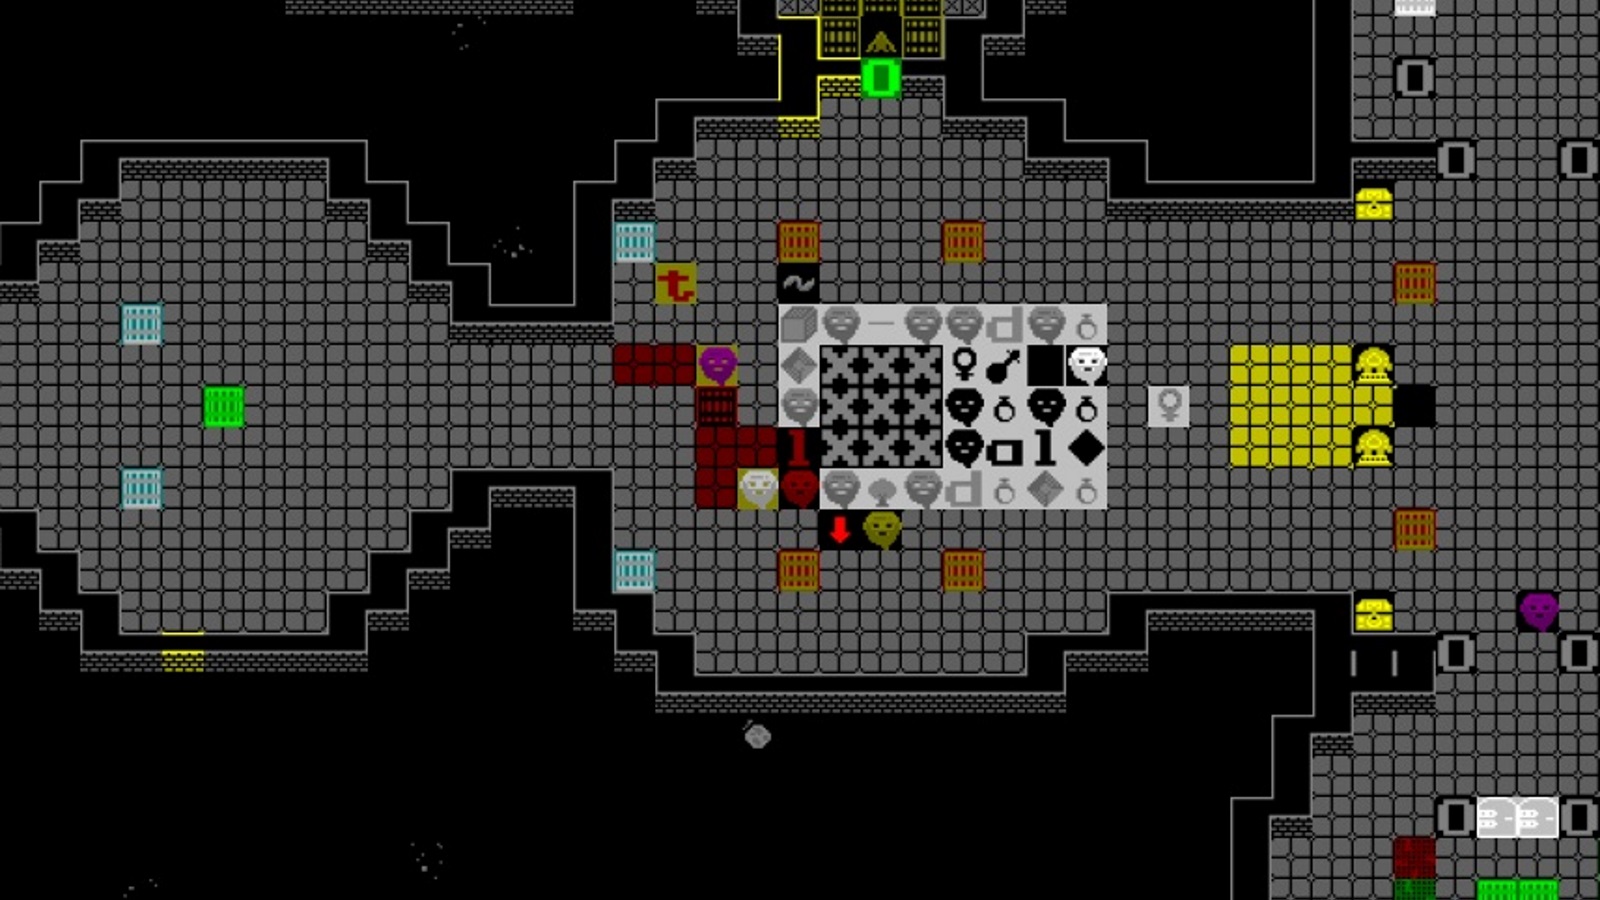 dwarf fortress fps counter position